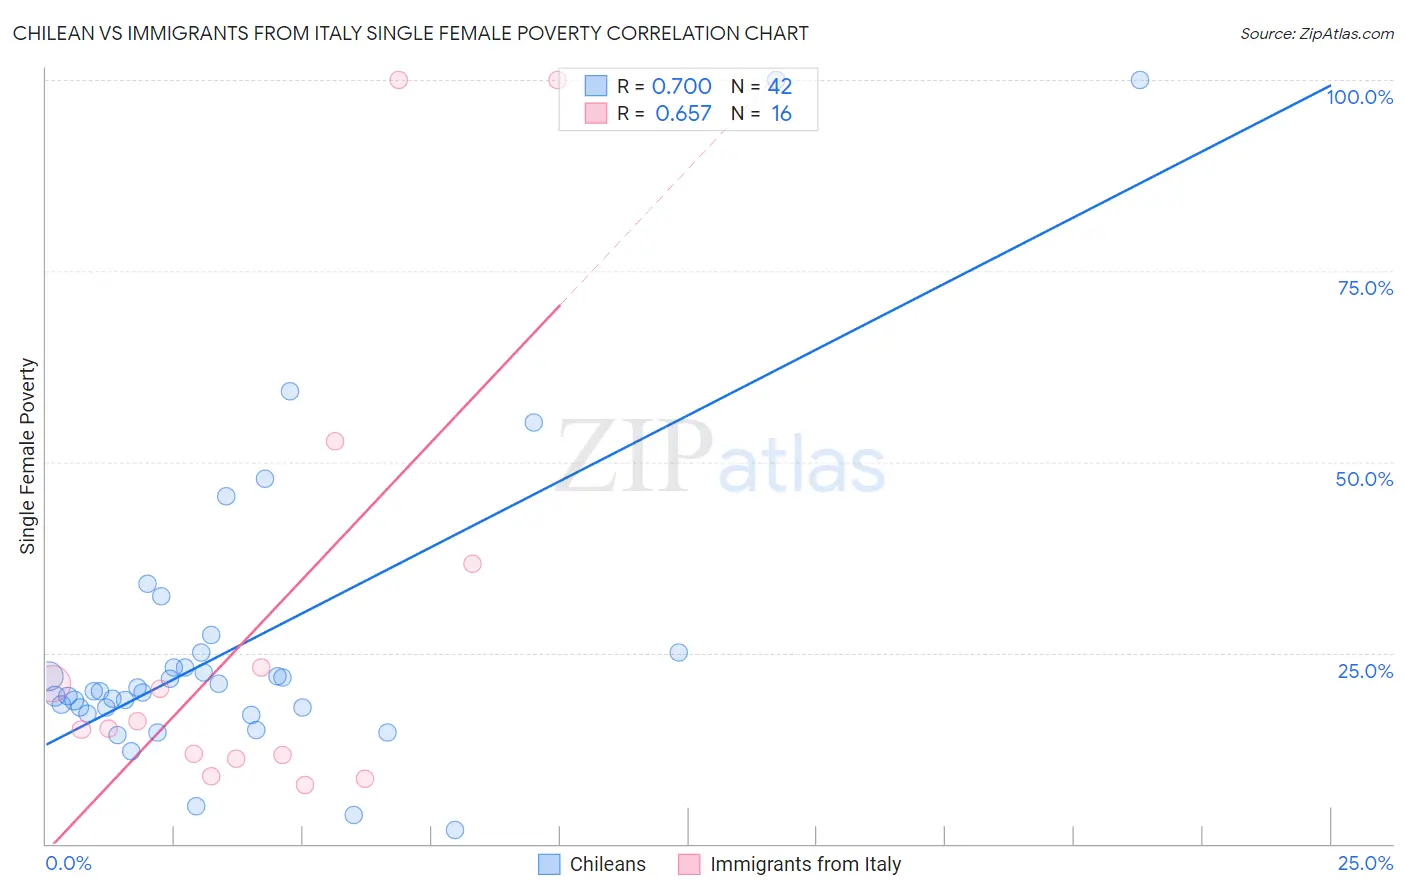 Chilean vs Immigrants from Italy Single Female Poverty